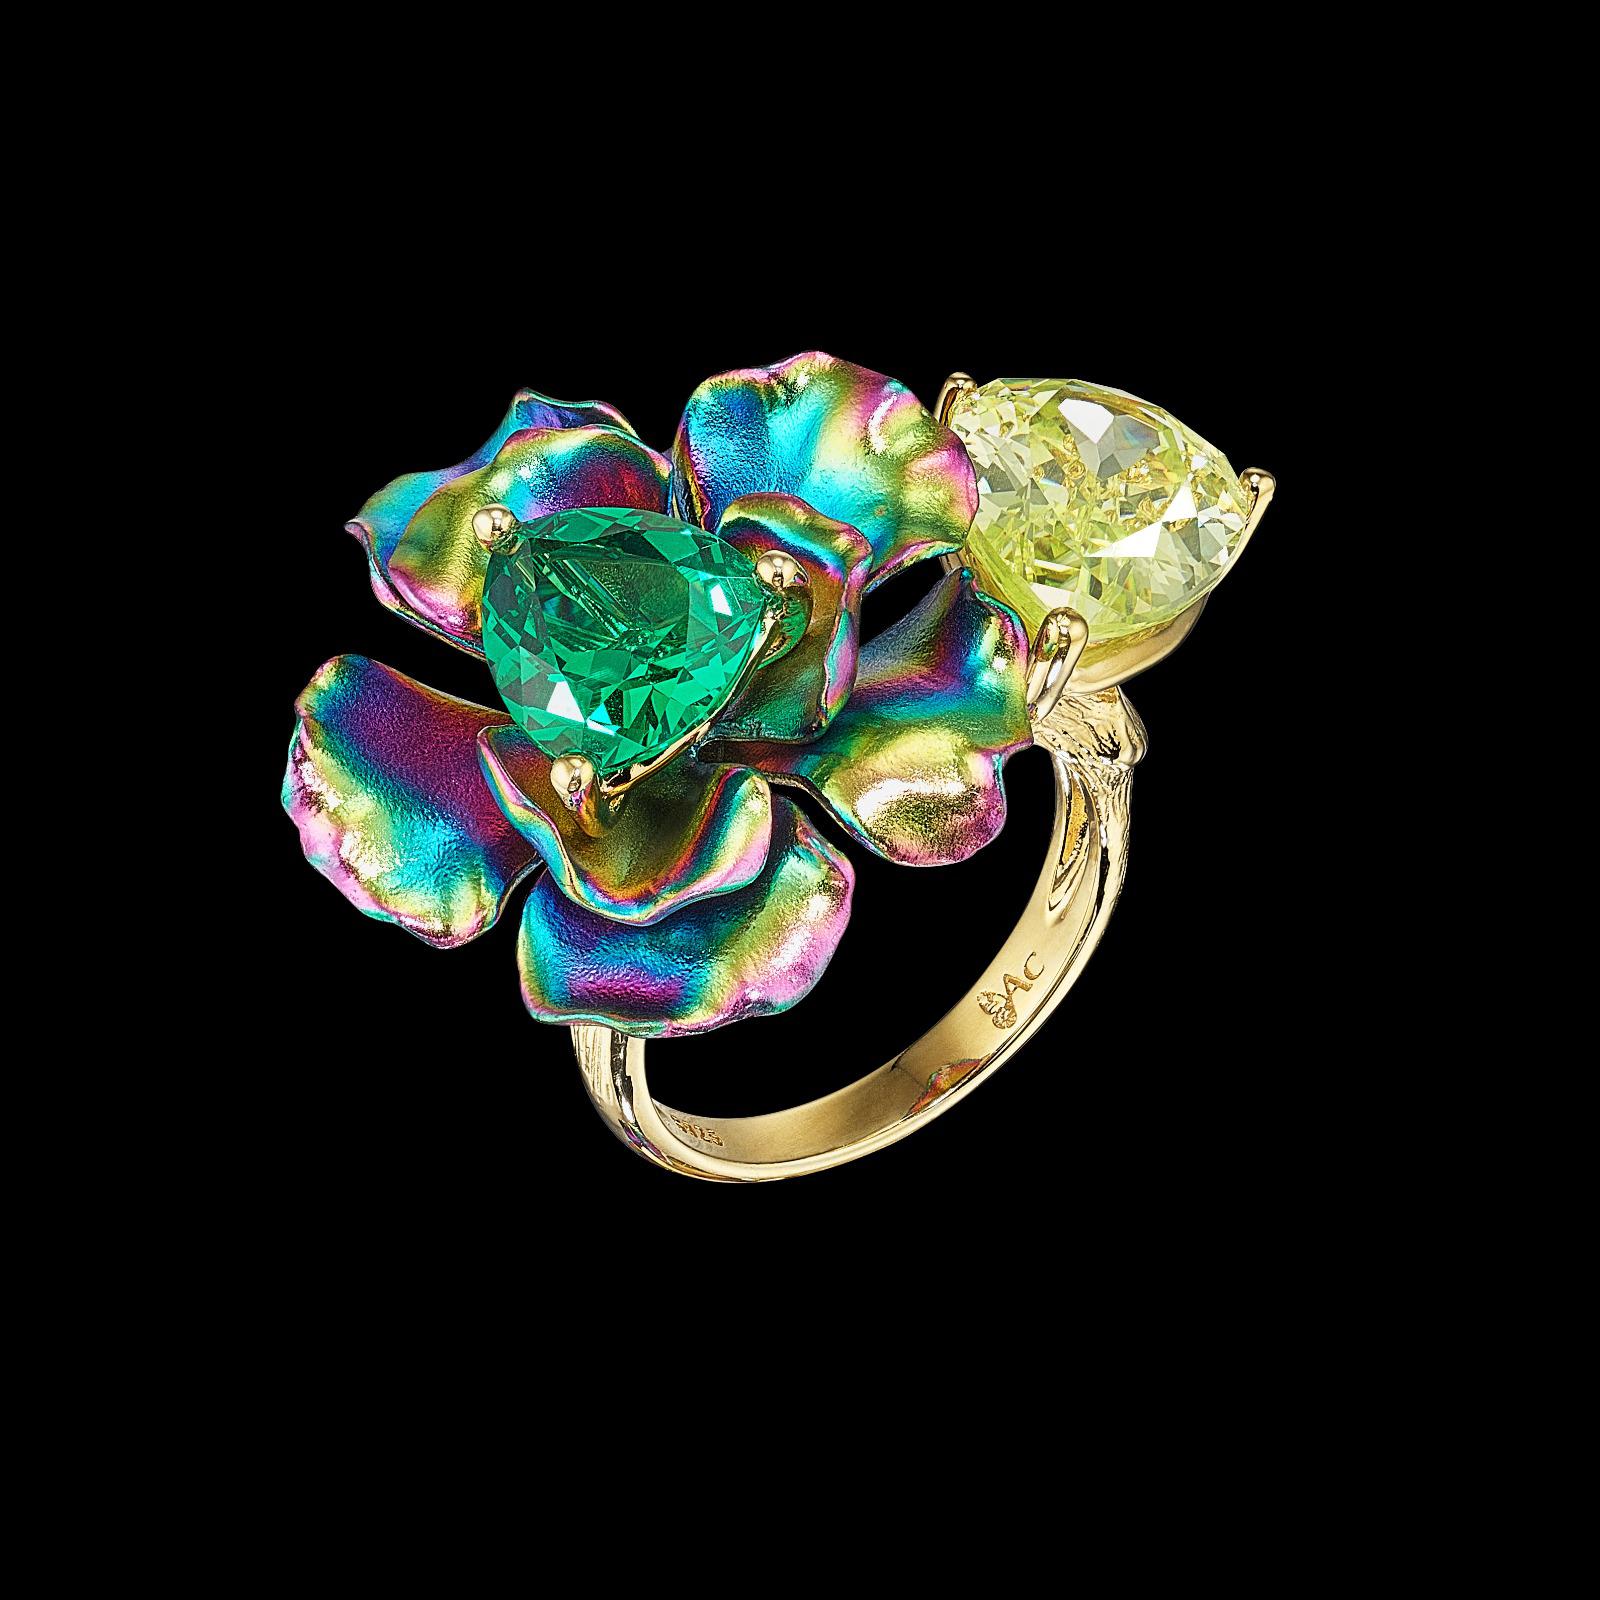 Acid Rainbow Bloom Ring, Ring, Anabela Chan Joaillerie - Fine jewelry with laboratory grown and created gemstones hand-crafted in the United Kingdom. Anabela Chan Joaillerie is the first fine jewellery brand in the world to champion laboratory-grown and created gemstones with high jewellery design, artisanal craftsmanship and a focus on ethical and sustainable innovations.